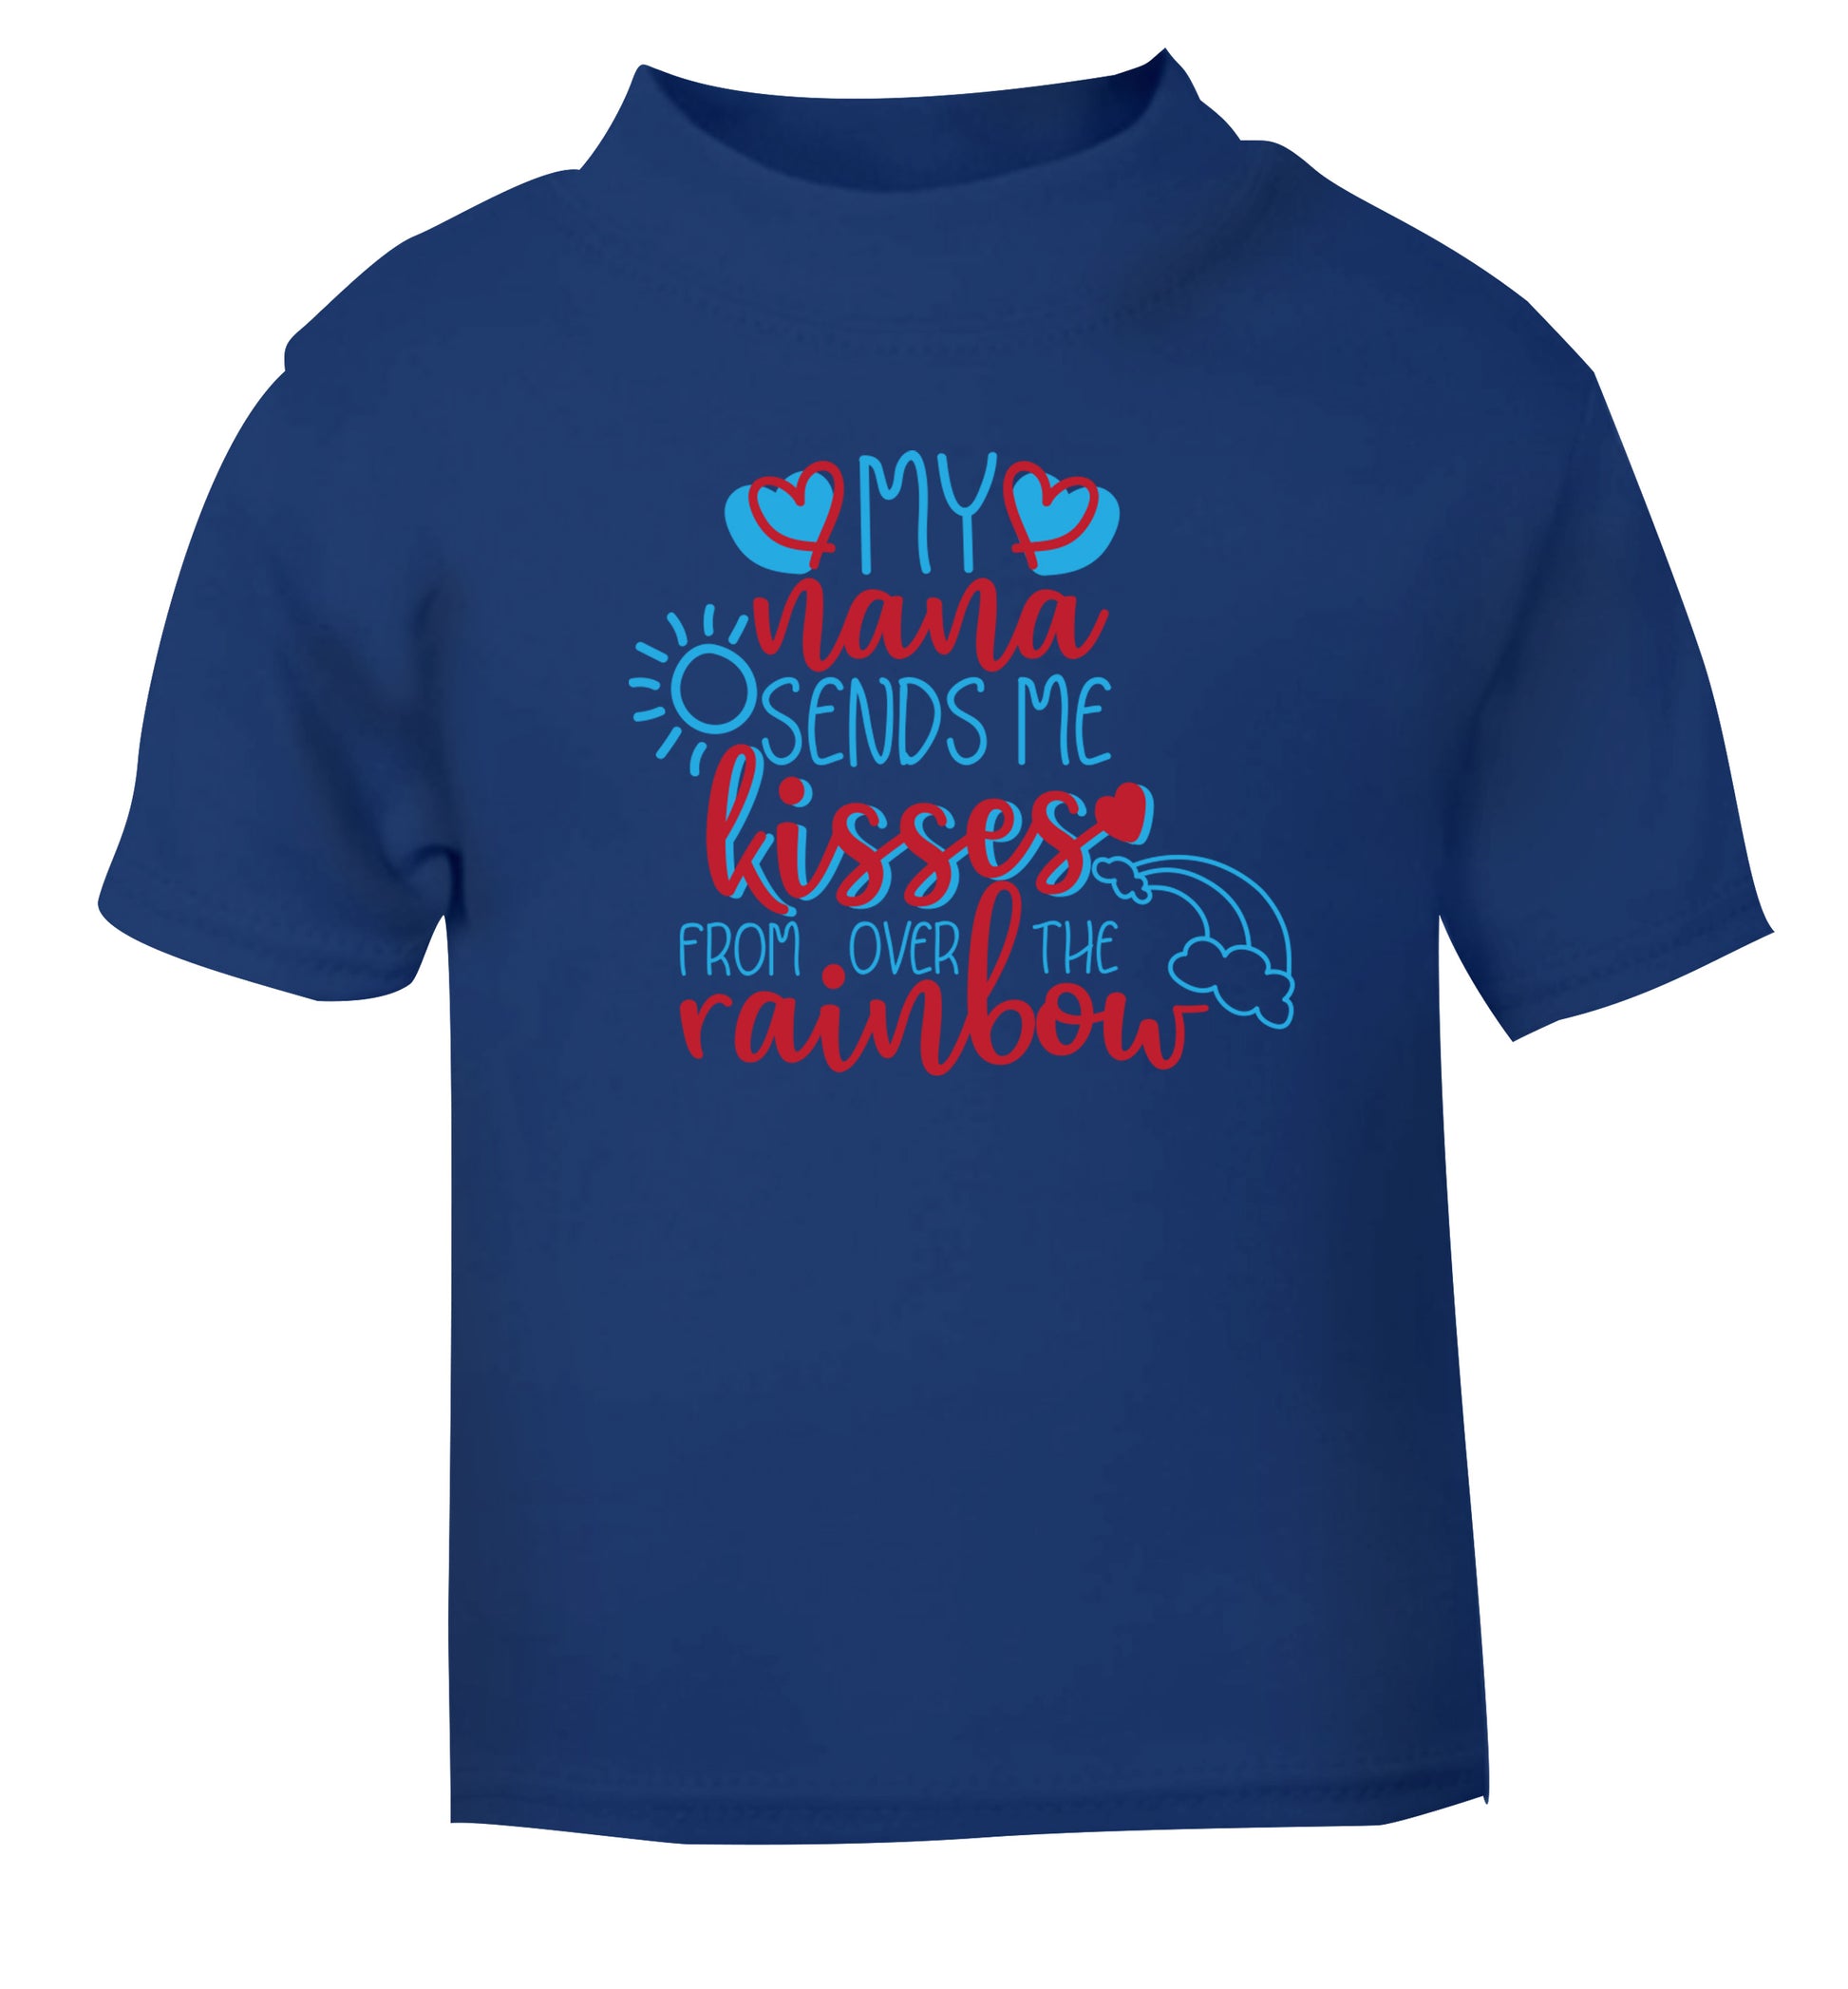 My nana sends me kisses from over the rainbow blue Baby Toddler Tshirt 2 Years